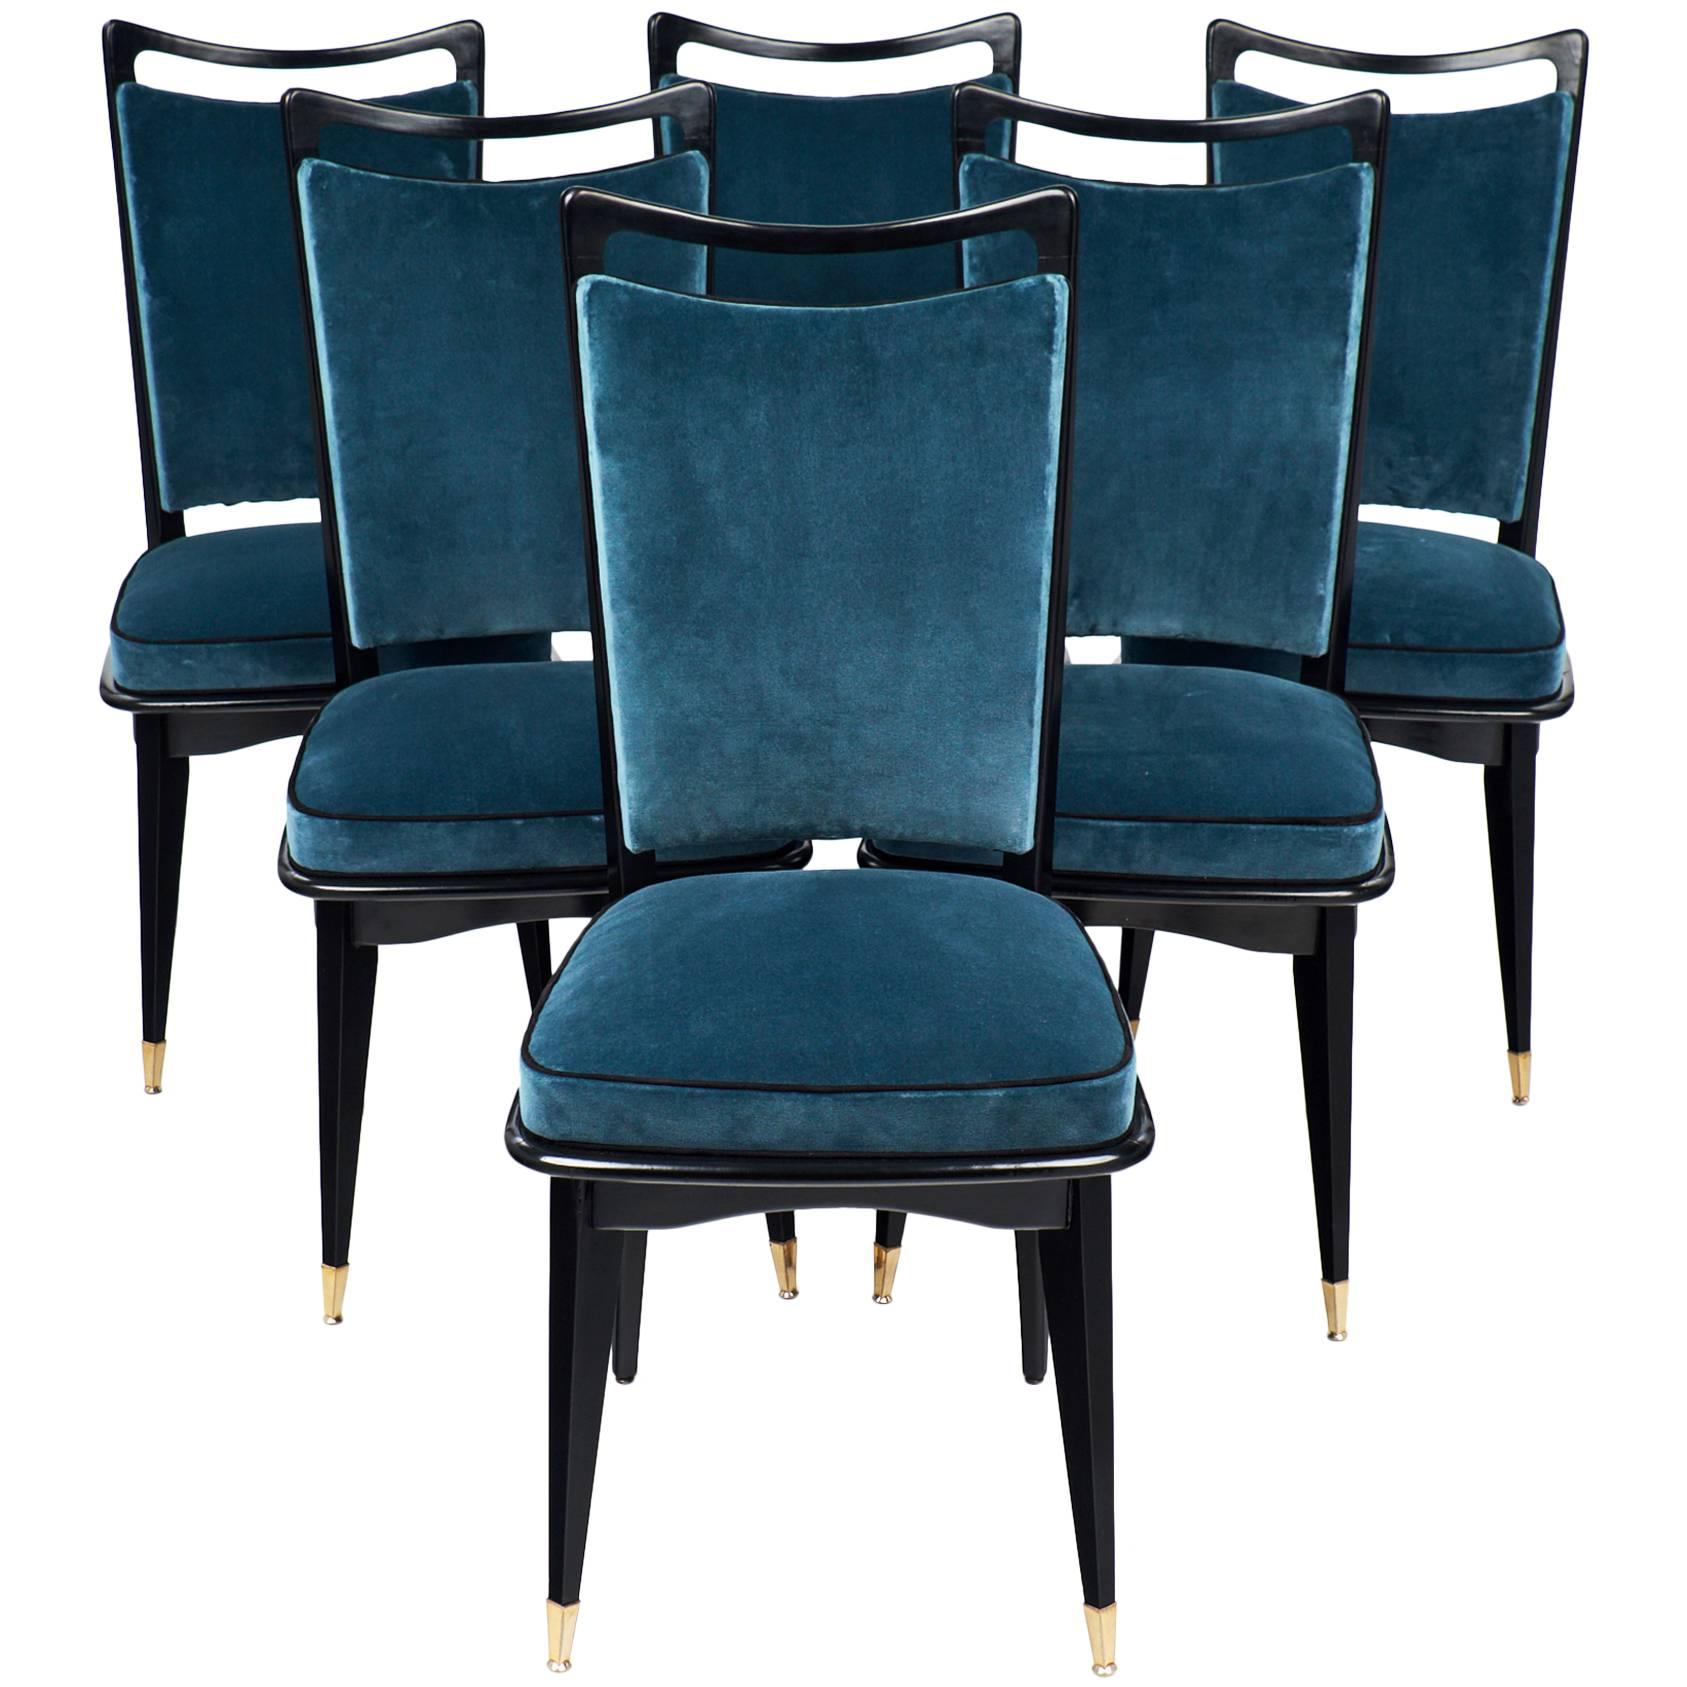 Set of Six French Mid-Century Modern Dining Room Chairs